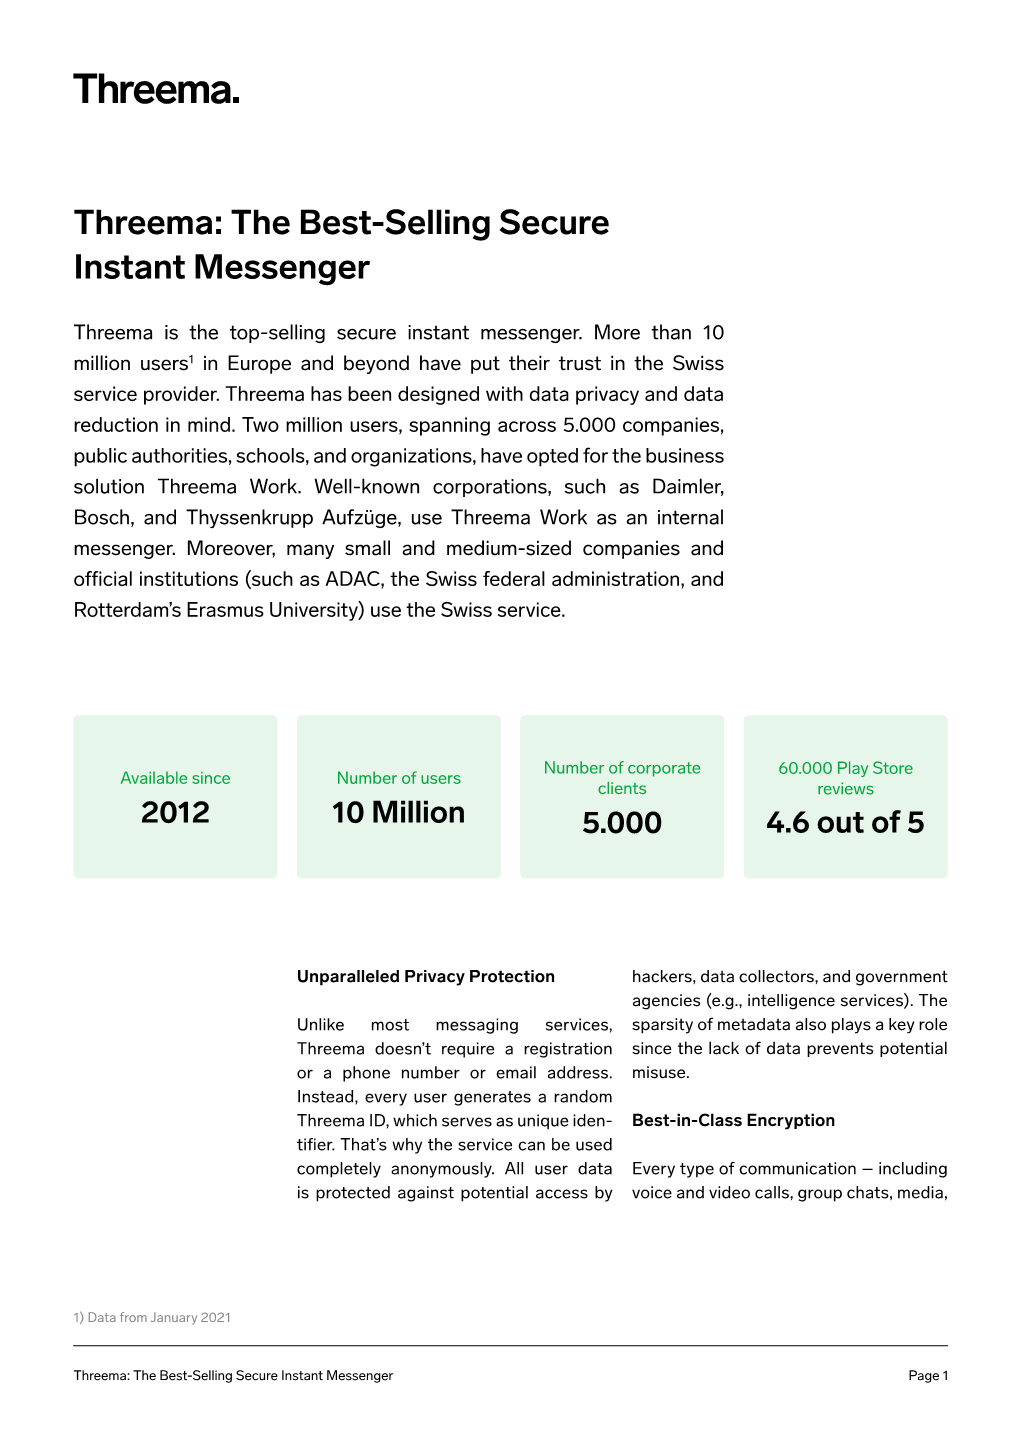 The Best-Selling Secure Instant Messenger